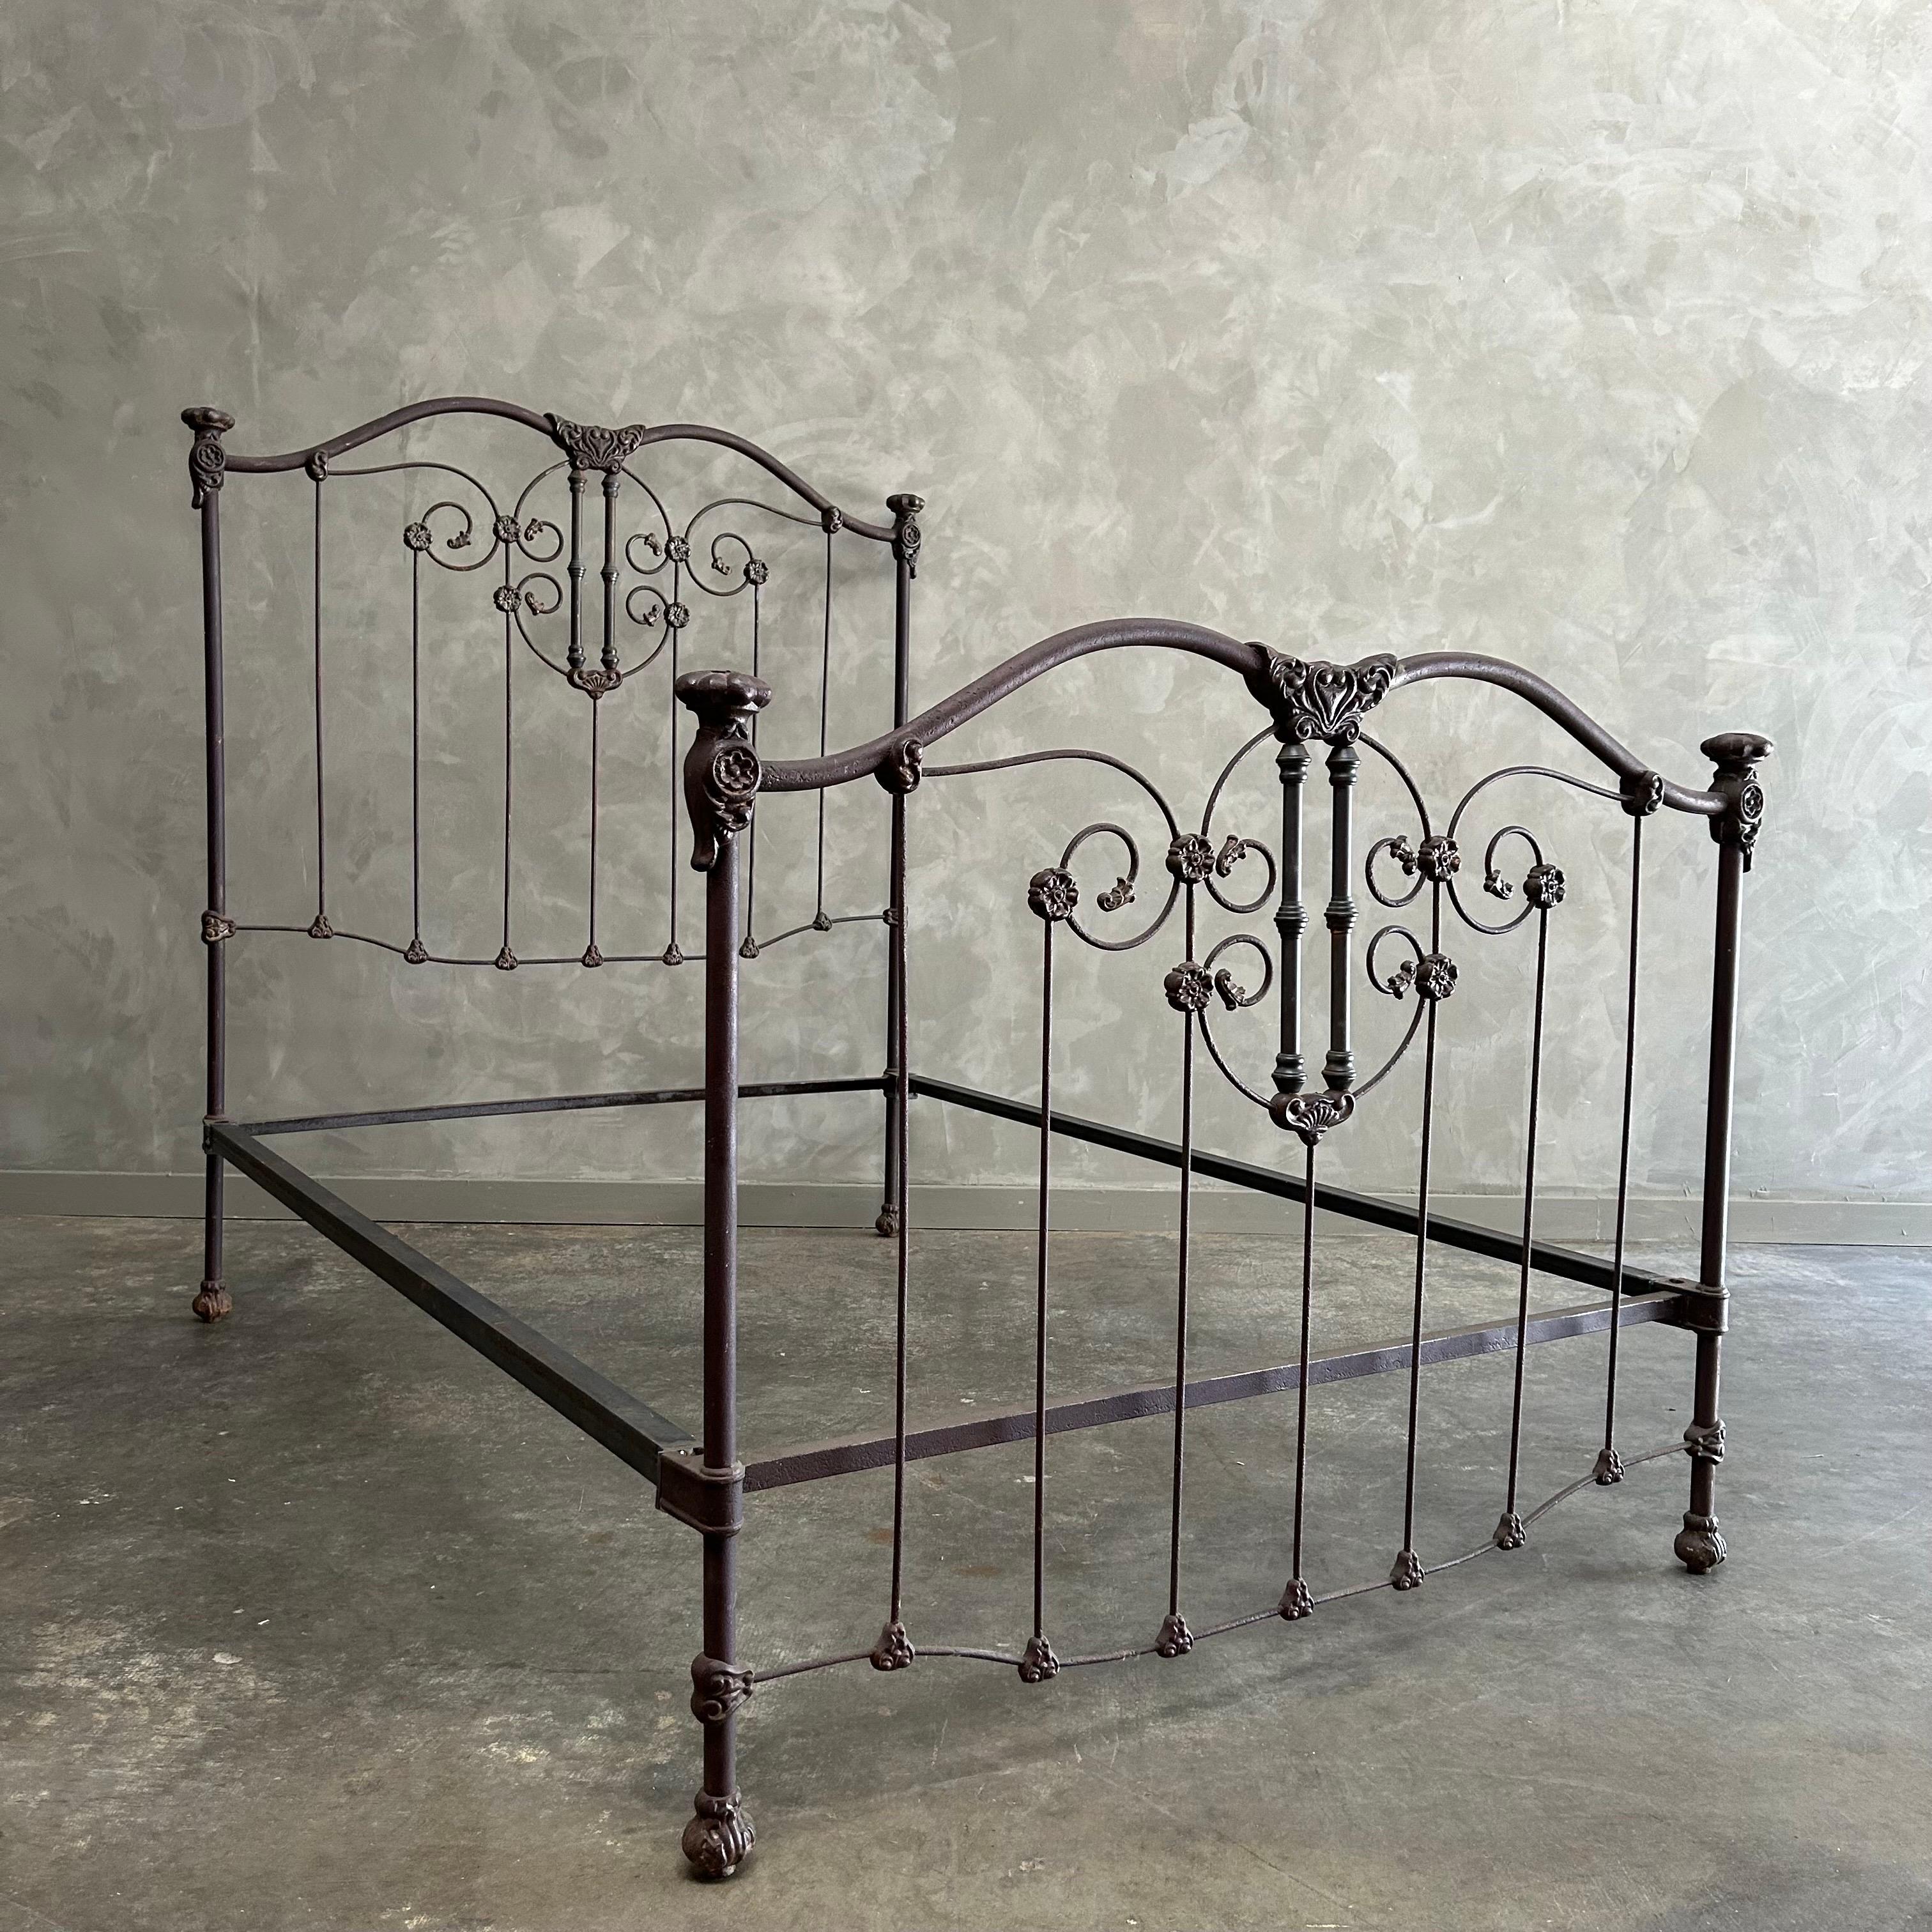 Welcome to bloomhomeinc we stock over 2000 items, please scroll down and click view sellers other items to see more!

Beautiful Iron full size bed 
Dimensions: 55”w x 80”d x 63”h
Footboard:43”h. 
Inside rails :54”w x76”d (US FULL SIZE)
Finish: Dark